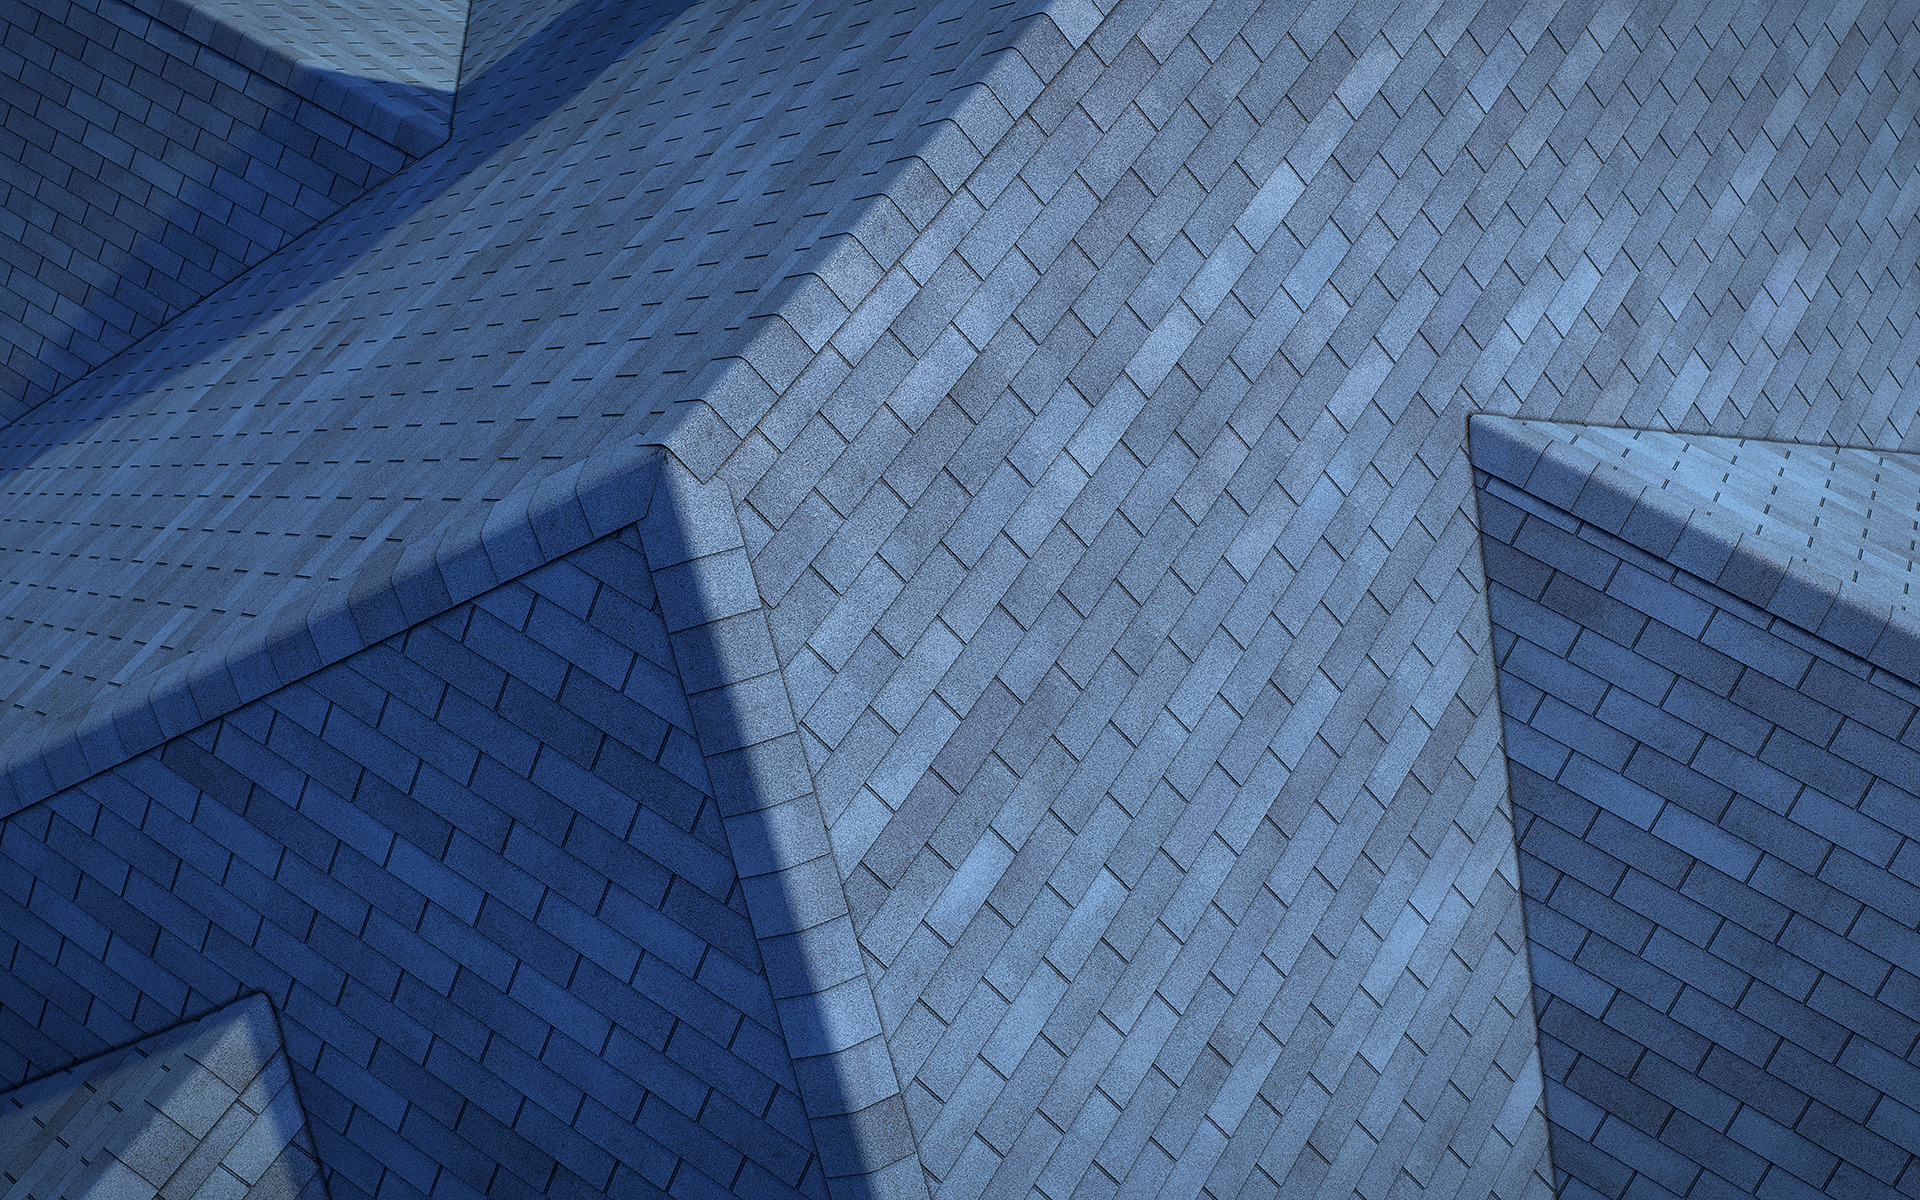 3-tab asphalt roof shingles blue color 3D model preset for 3dsmax and RailClone. Rendered with vray, made for arch-viz.